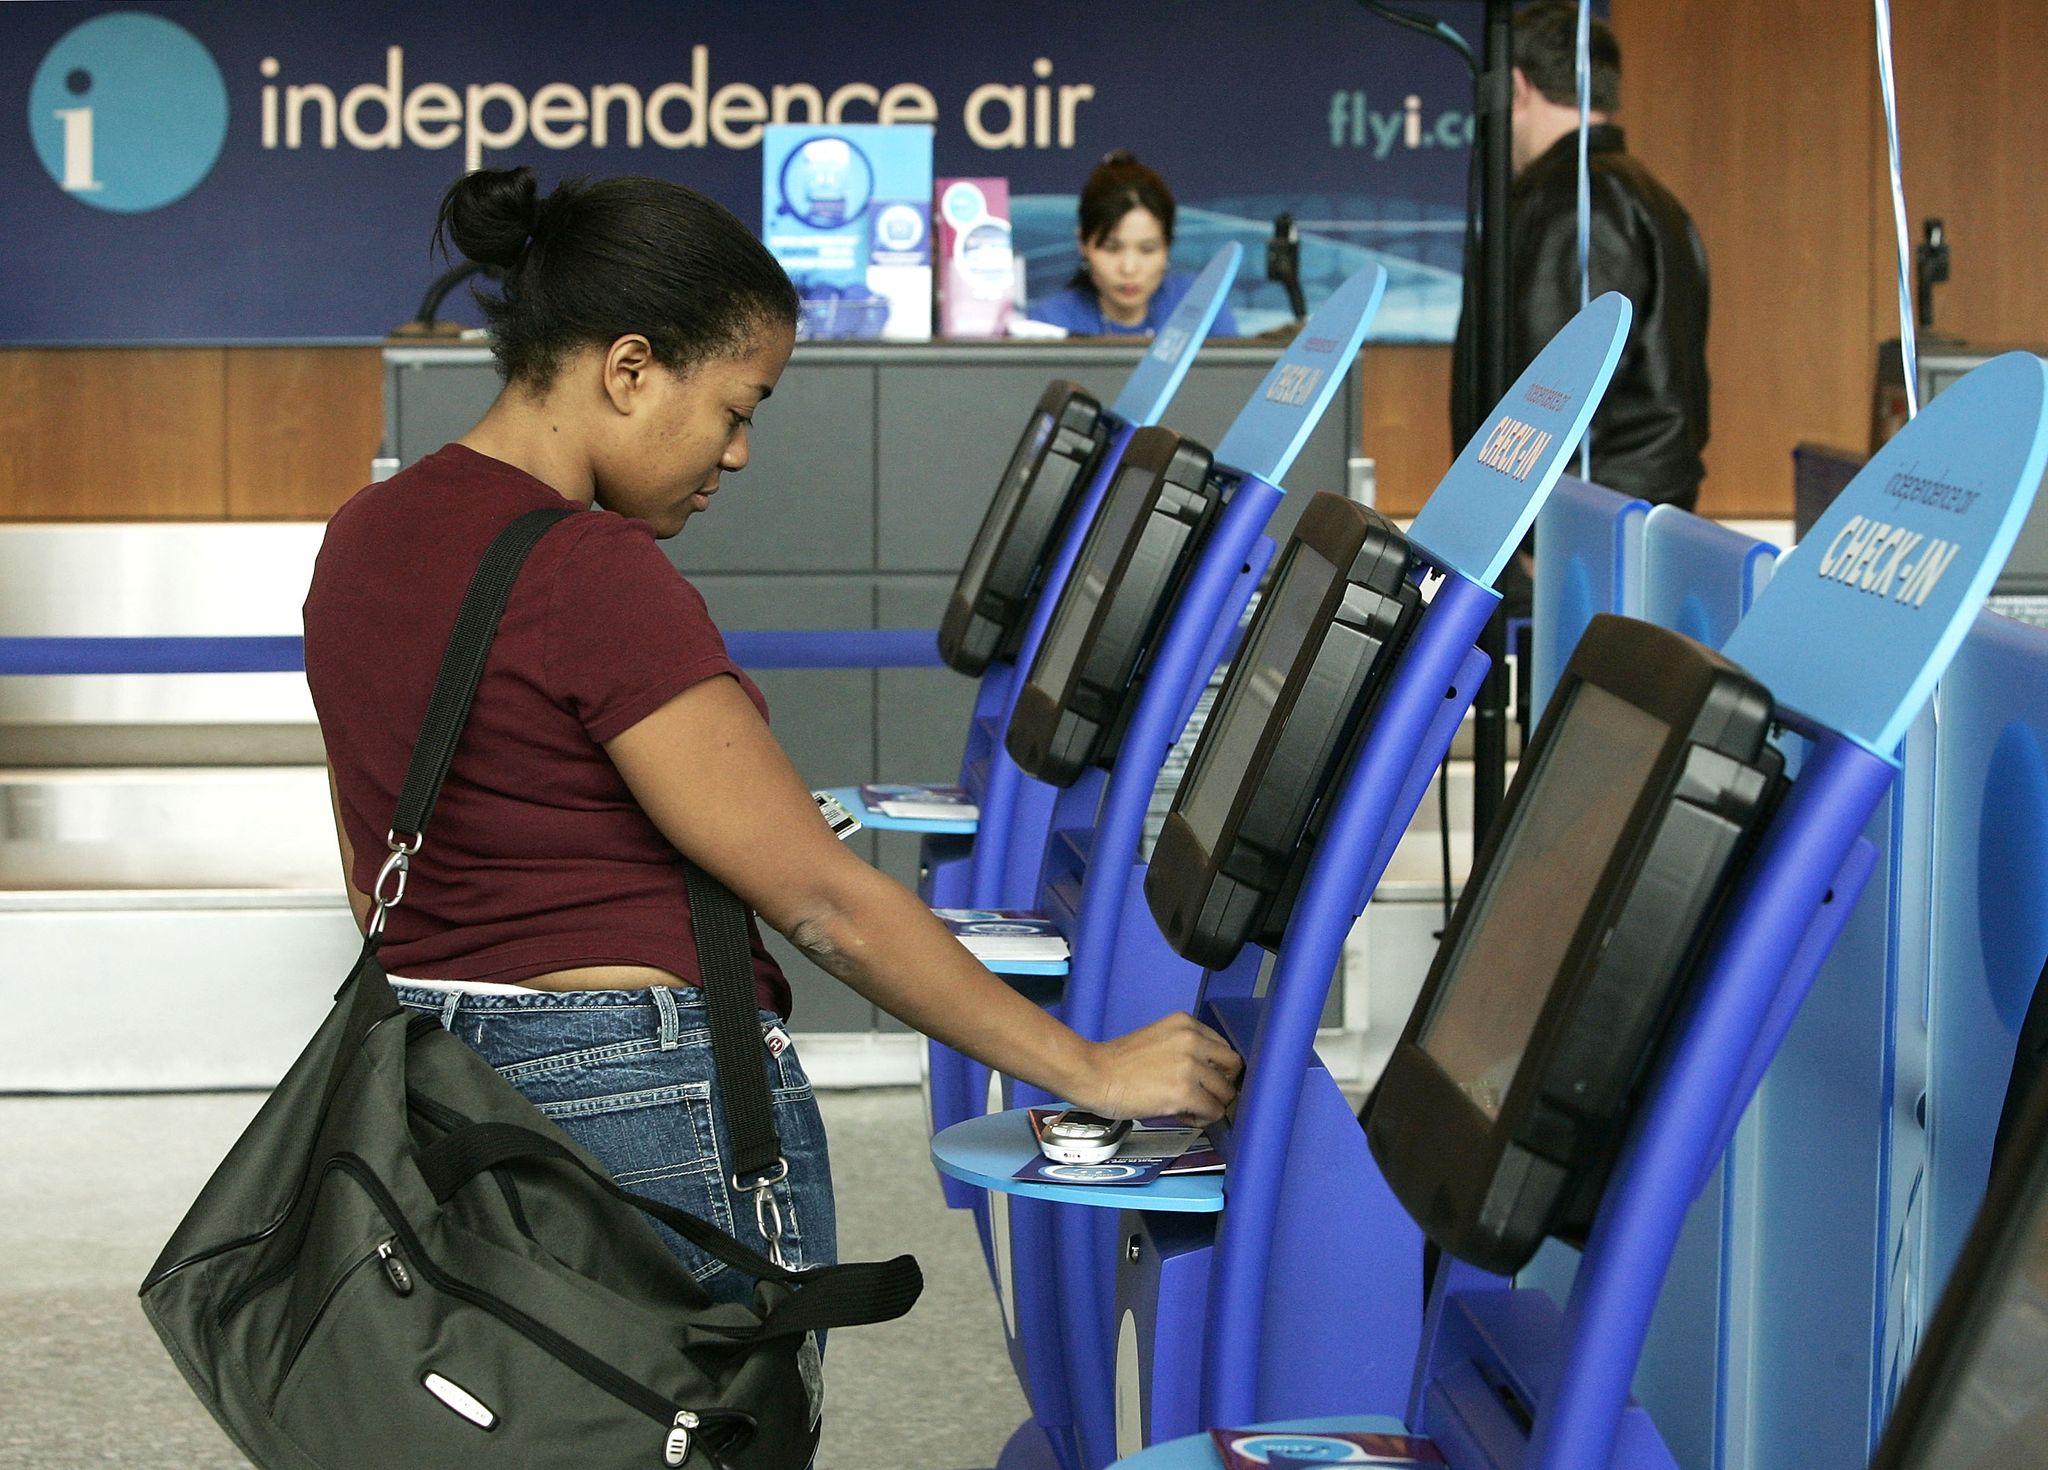 independence air announces new service promise